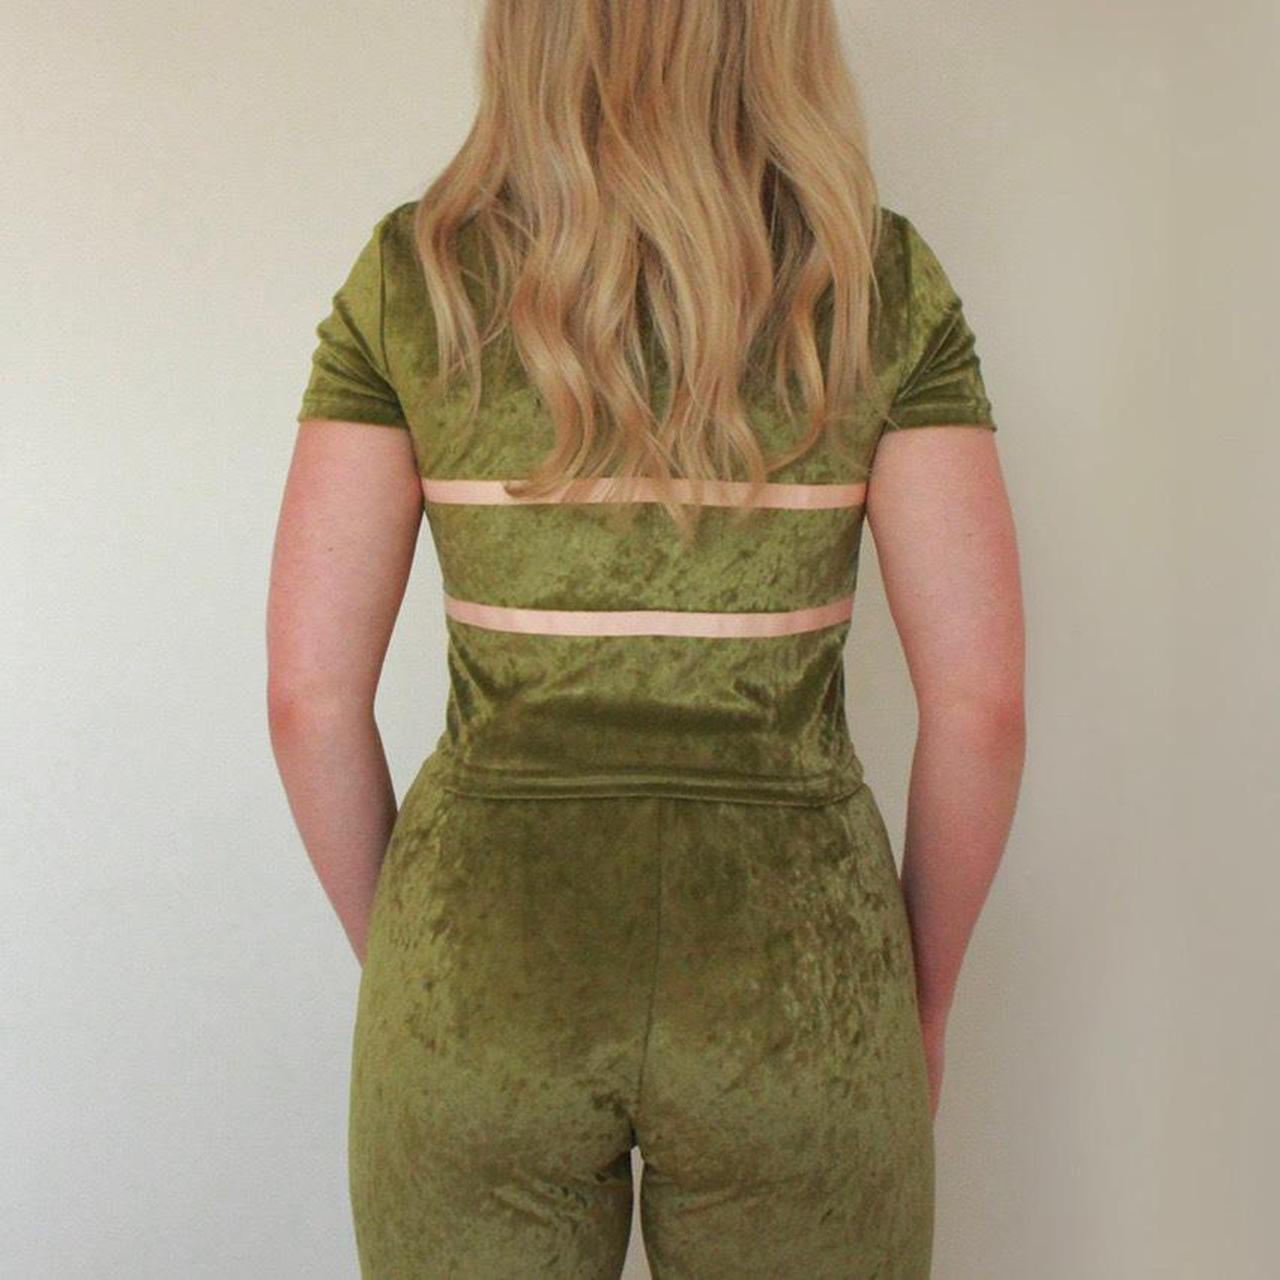 Product Image 2 - The CELIAPOPS velour olive green